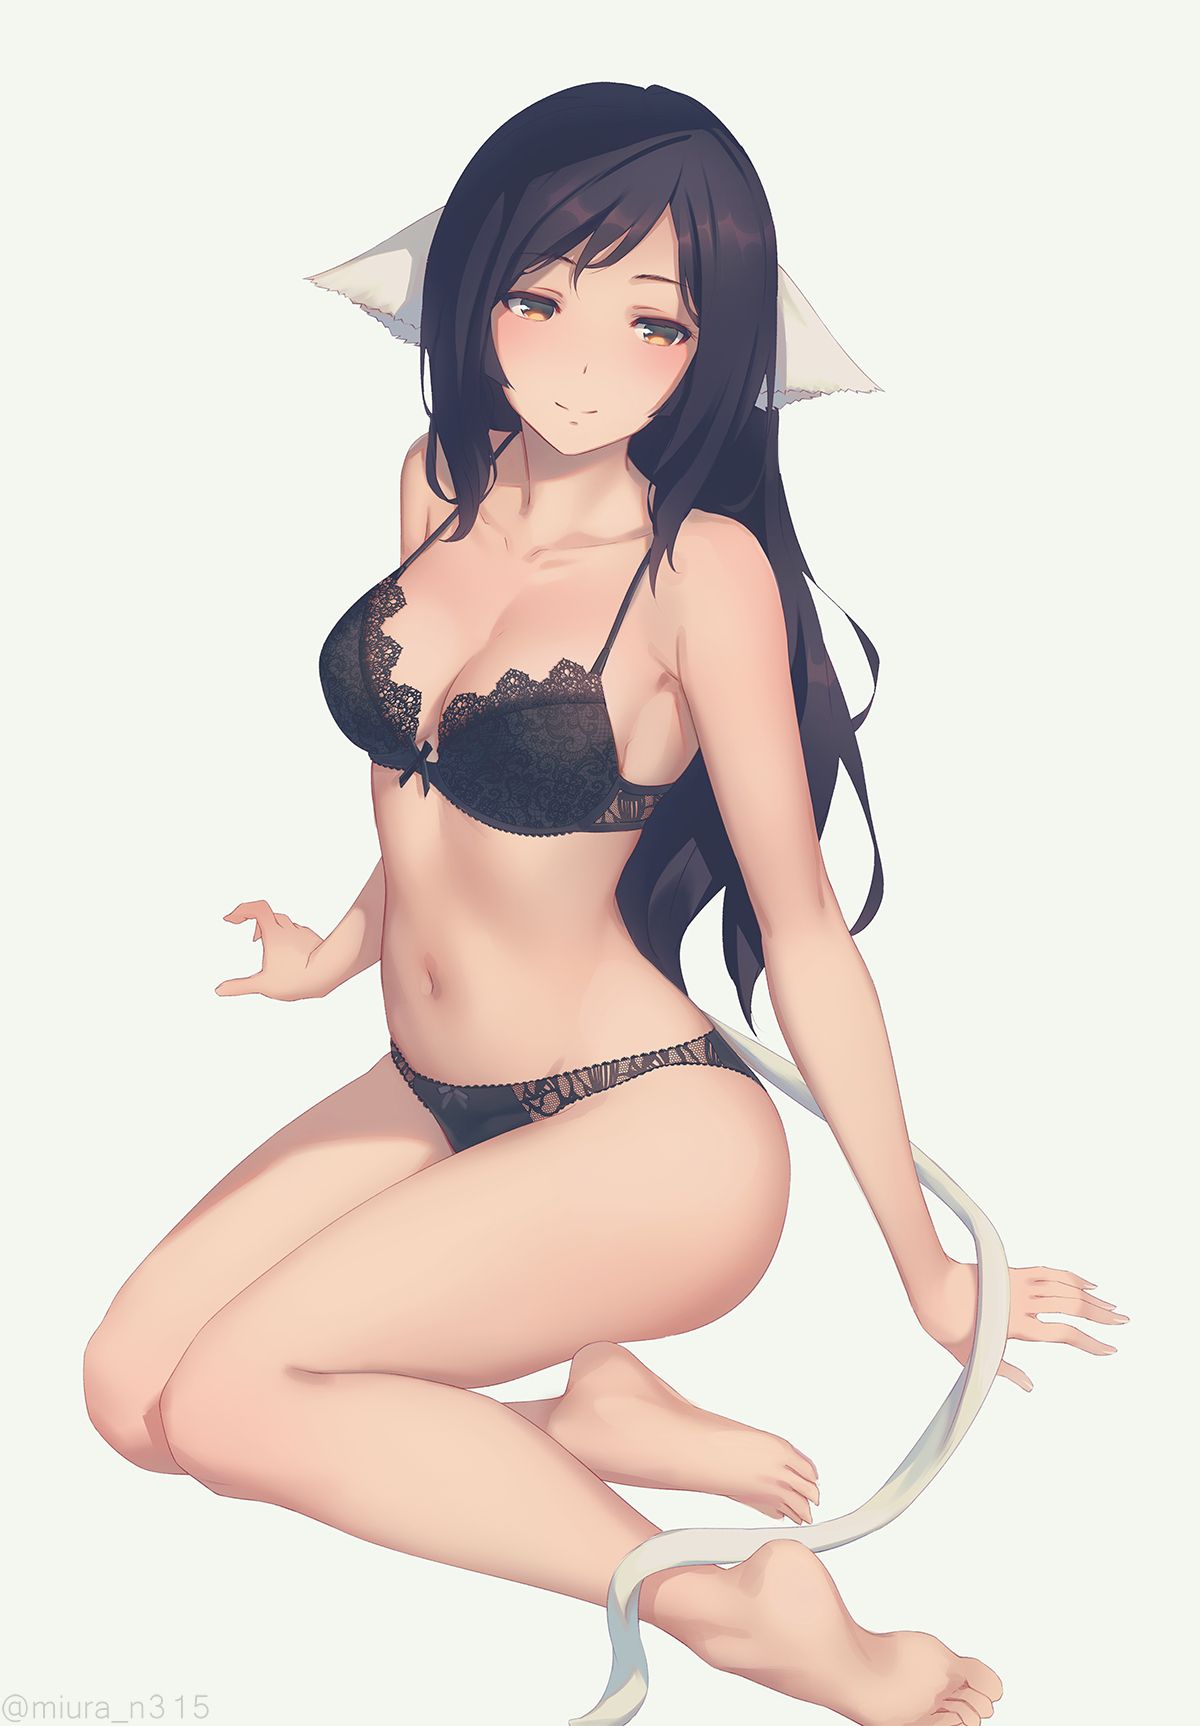 Erotic anime summary Erotic image collection of beautiful girls wearing sexy black underwear [50 sheets] 21